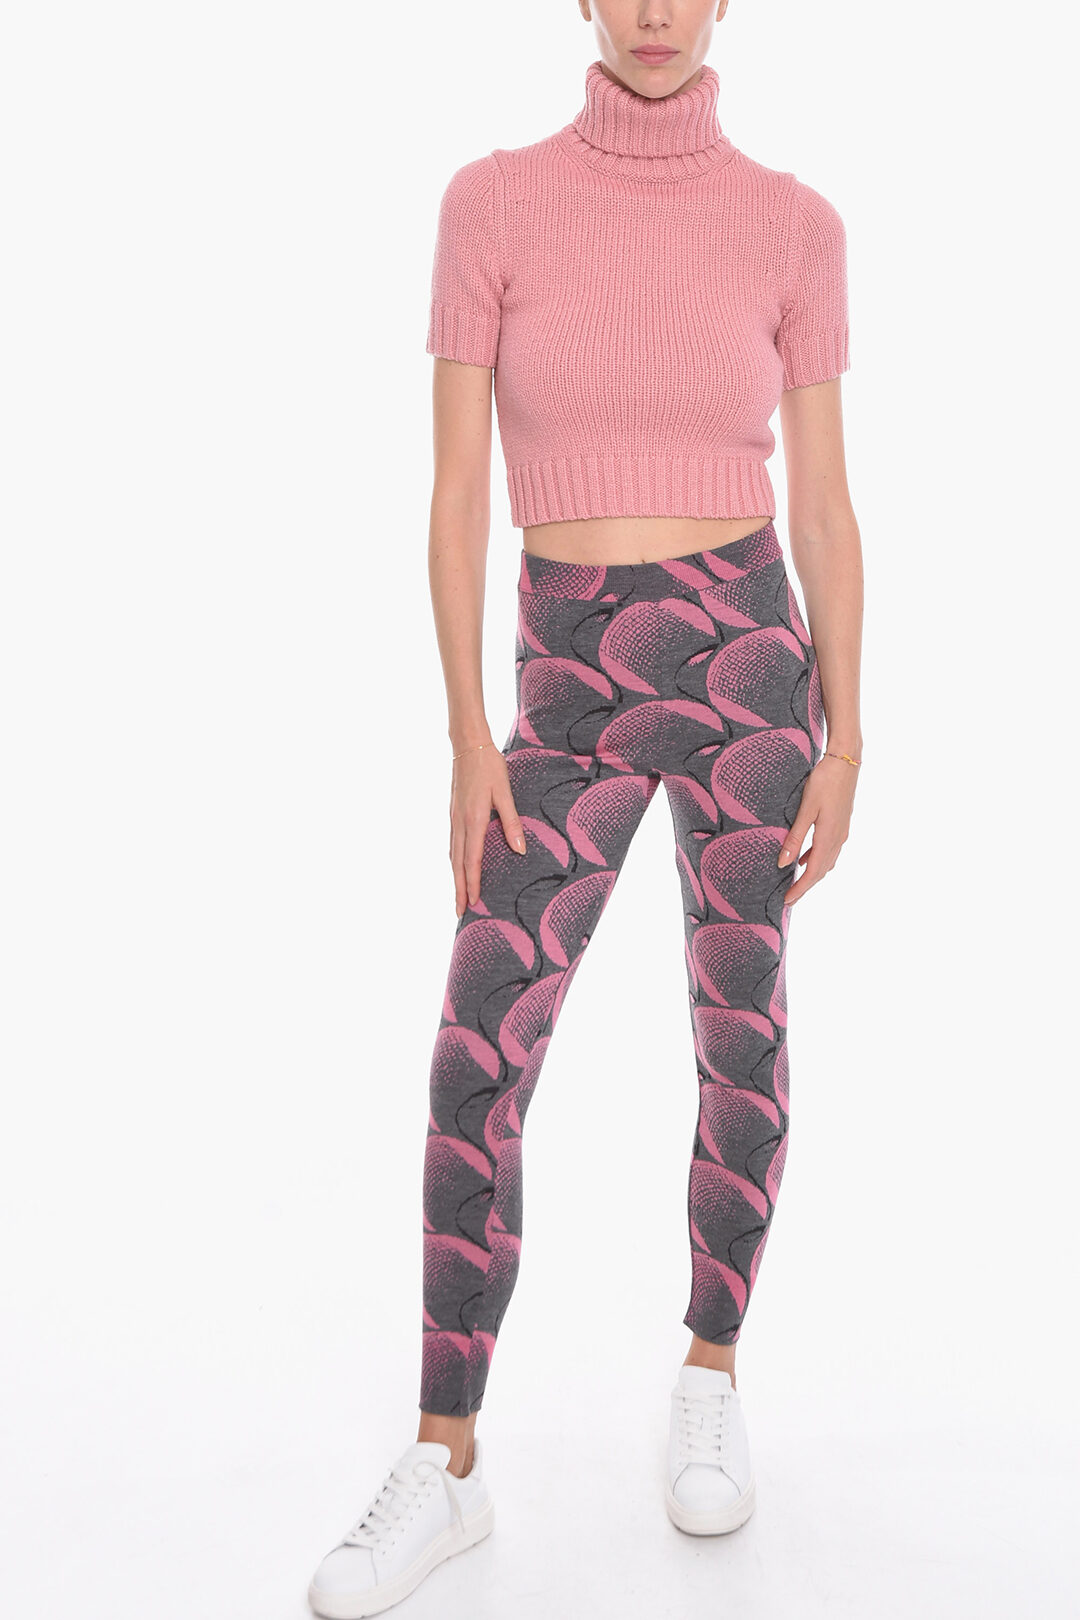 Prada Abstract Patterned Wool Blend Leggings women - Glamood Outlet